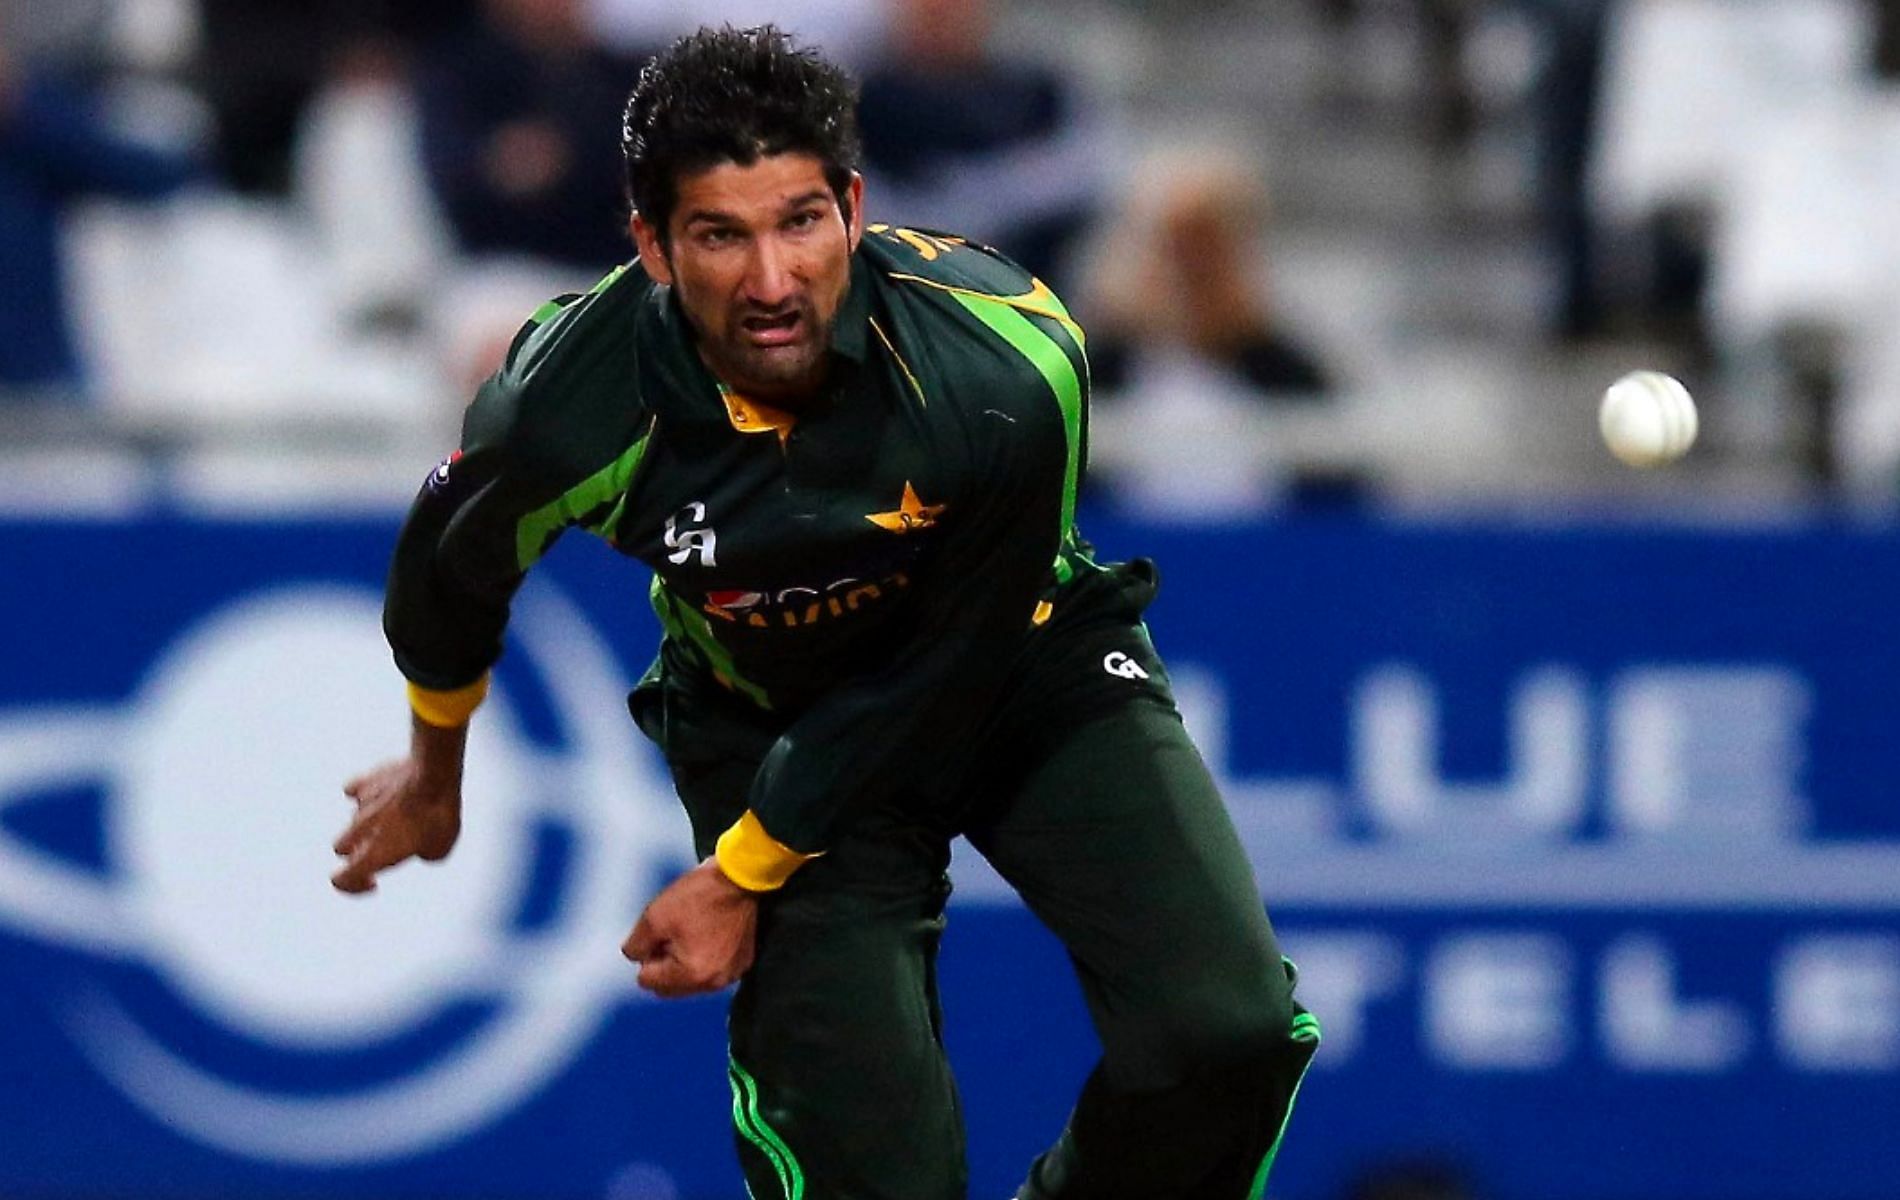 Sohail Tanvir in action. (Pic: ICC/Twitter)